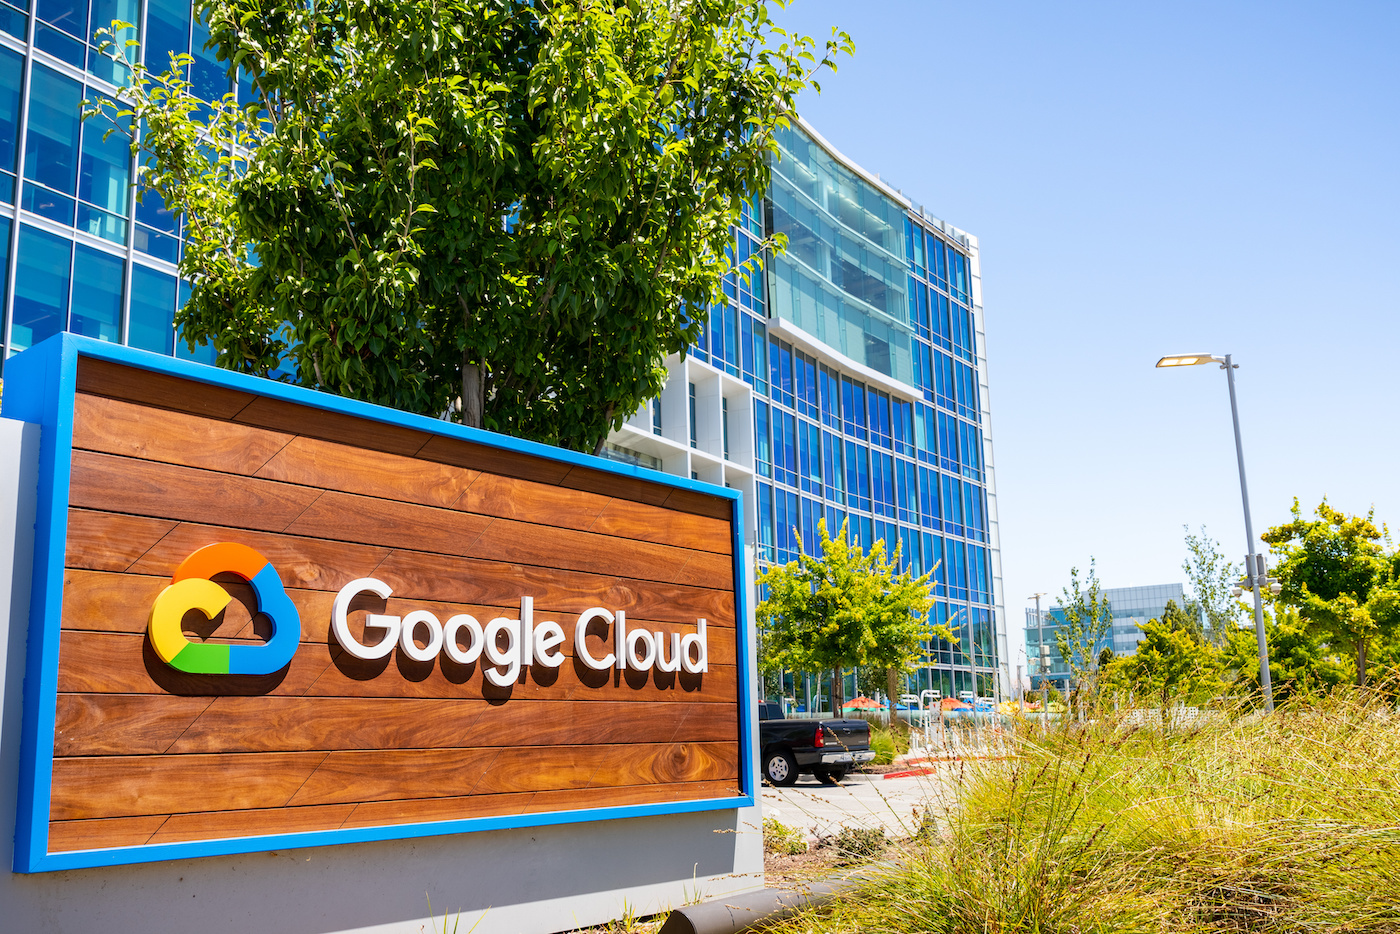 With Political ‘hacktivism’ On The Rise, Google Launches Project Shield To Fight DDoS Attacks